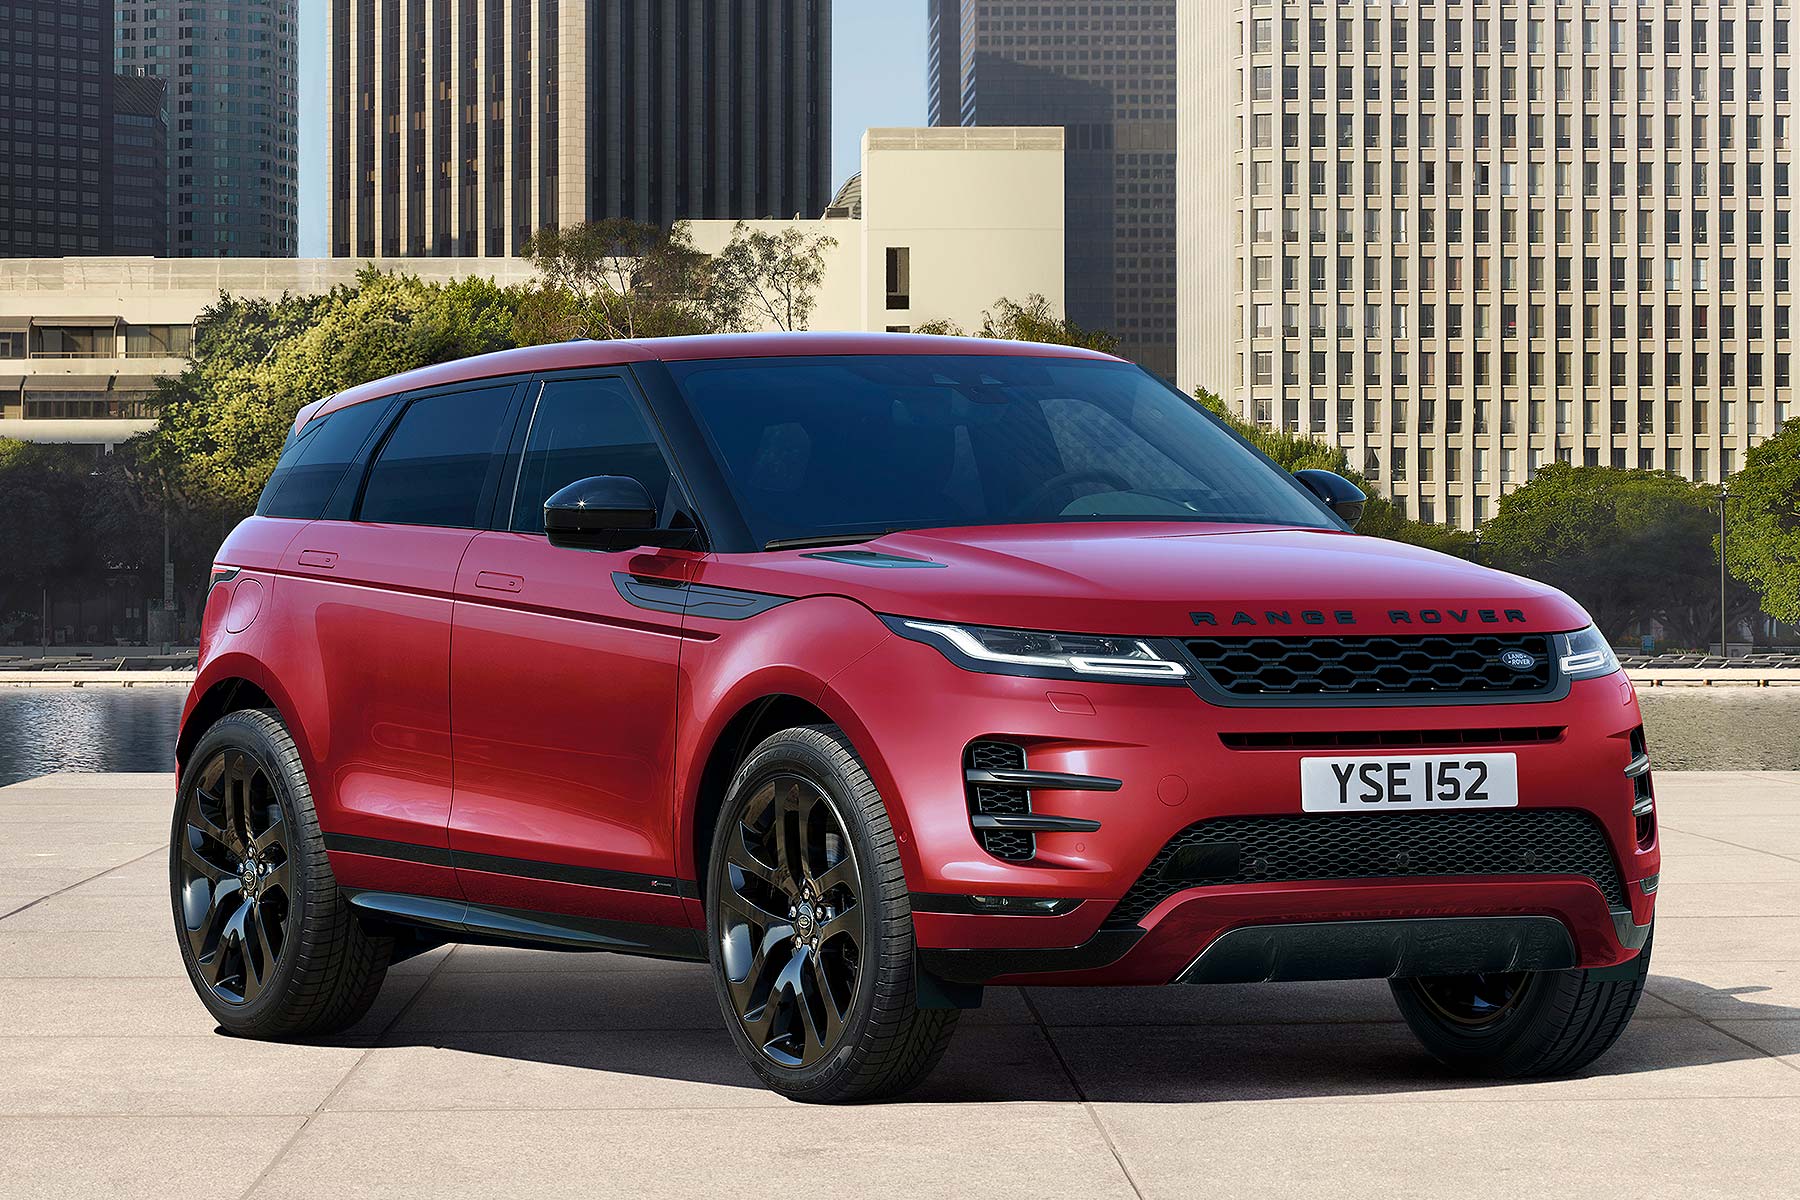 Range Rover Evoque Hse Price  - Lessee Has Option To Purchase Vehicle At Lease End At Price Negotiated With Retailer And Approved Lender At Signing.